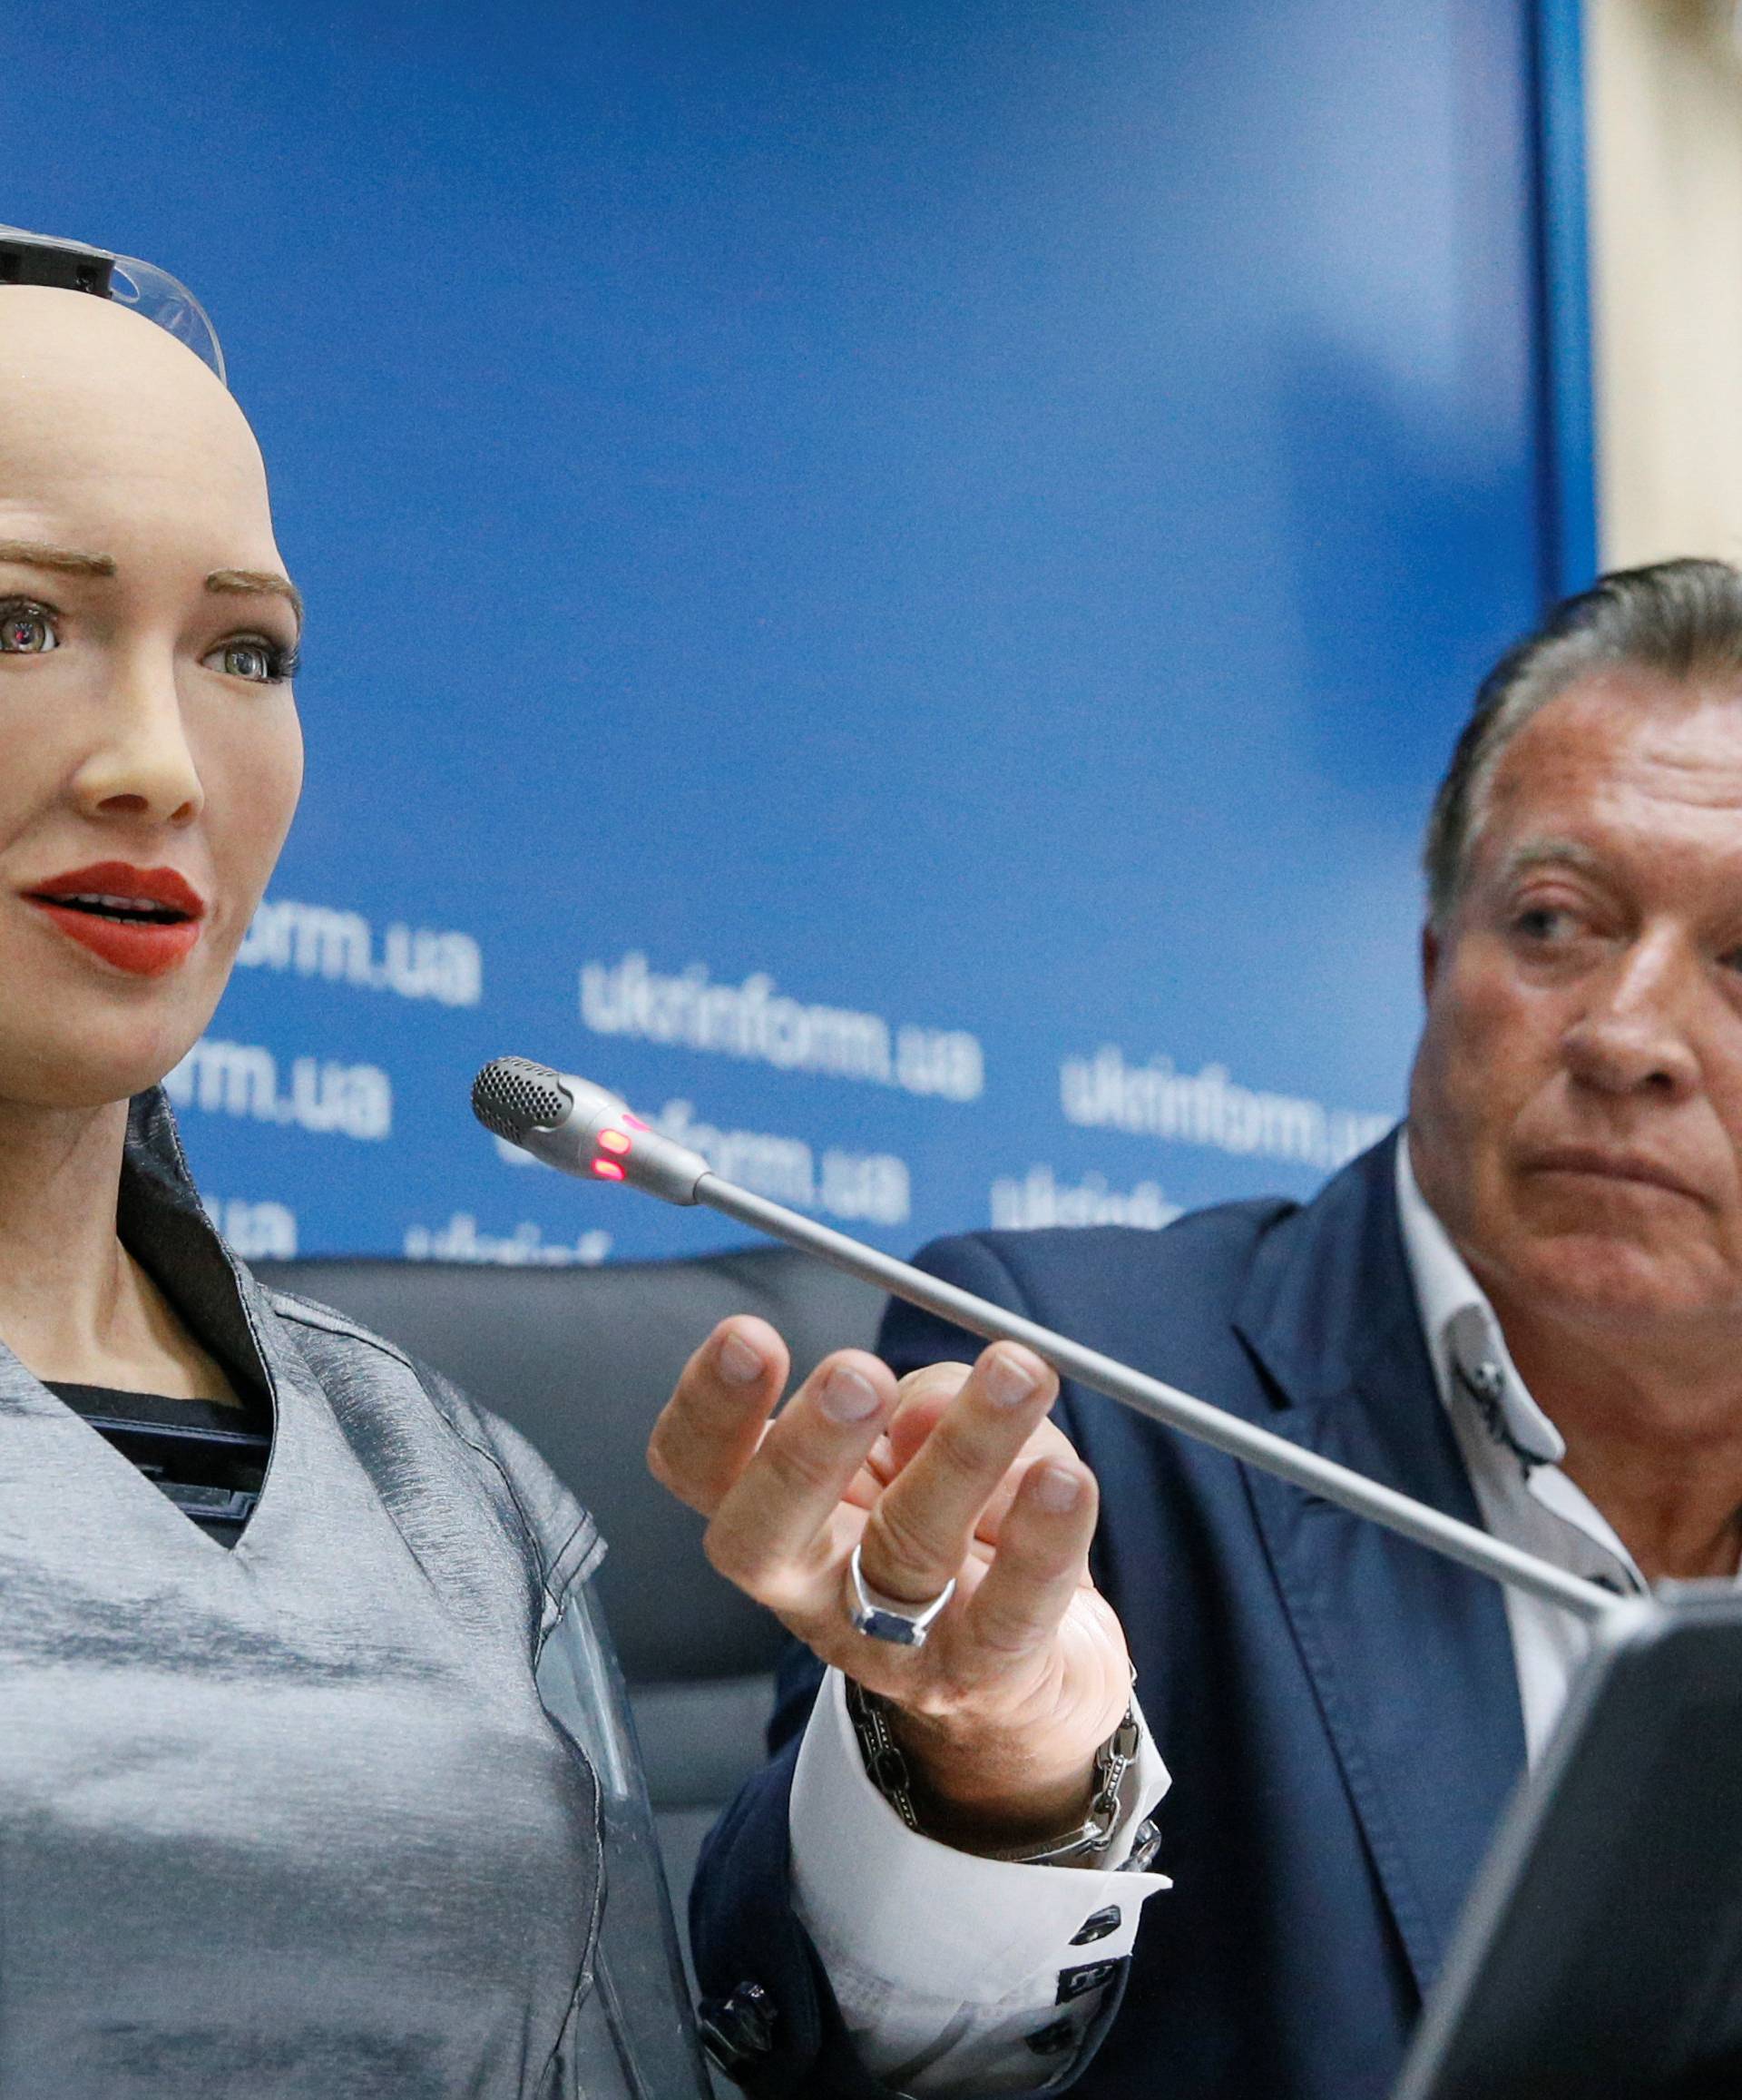 Social humanoid robot Sophia attends a news conference in Kiev